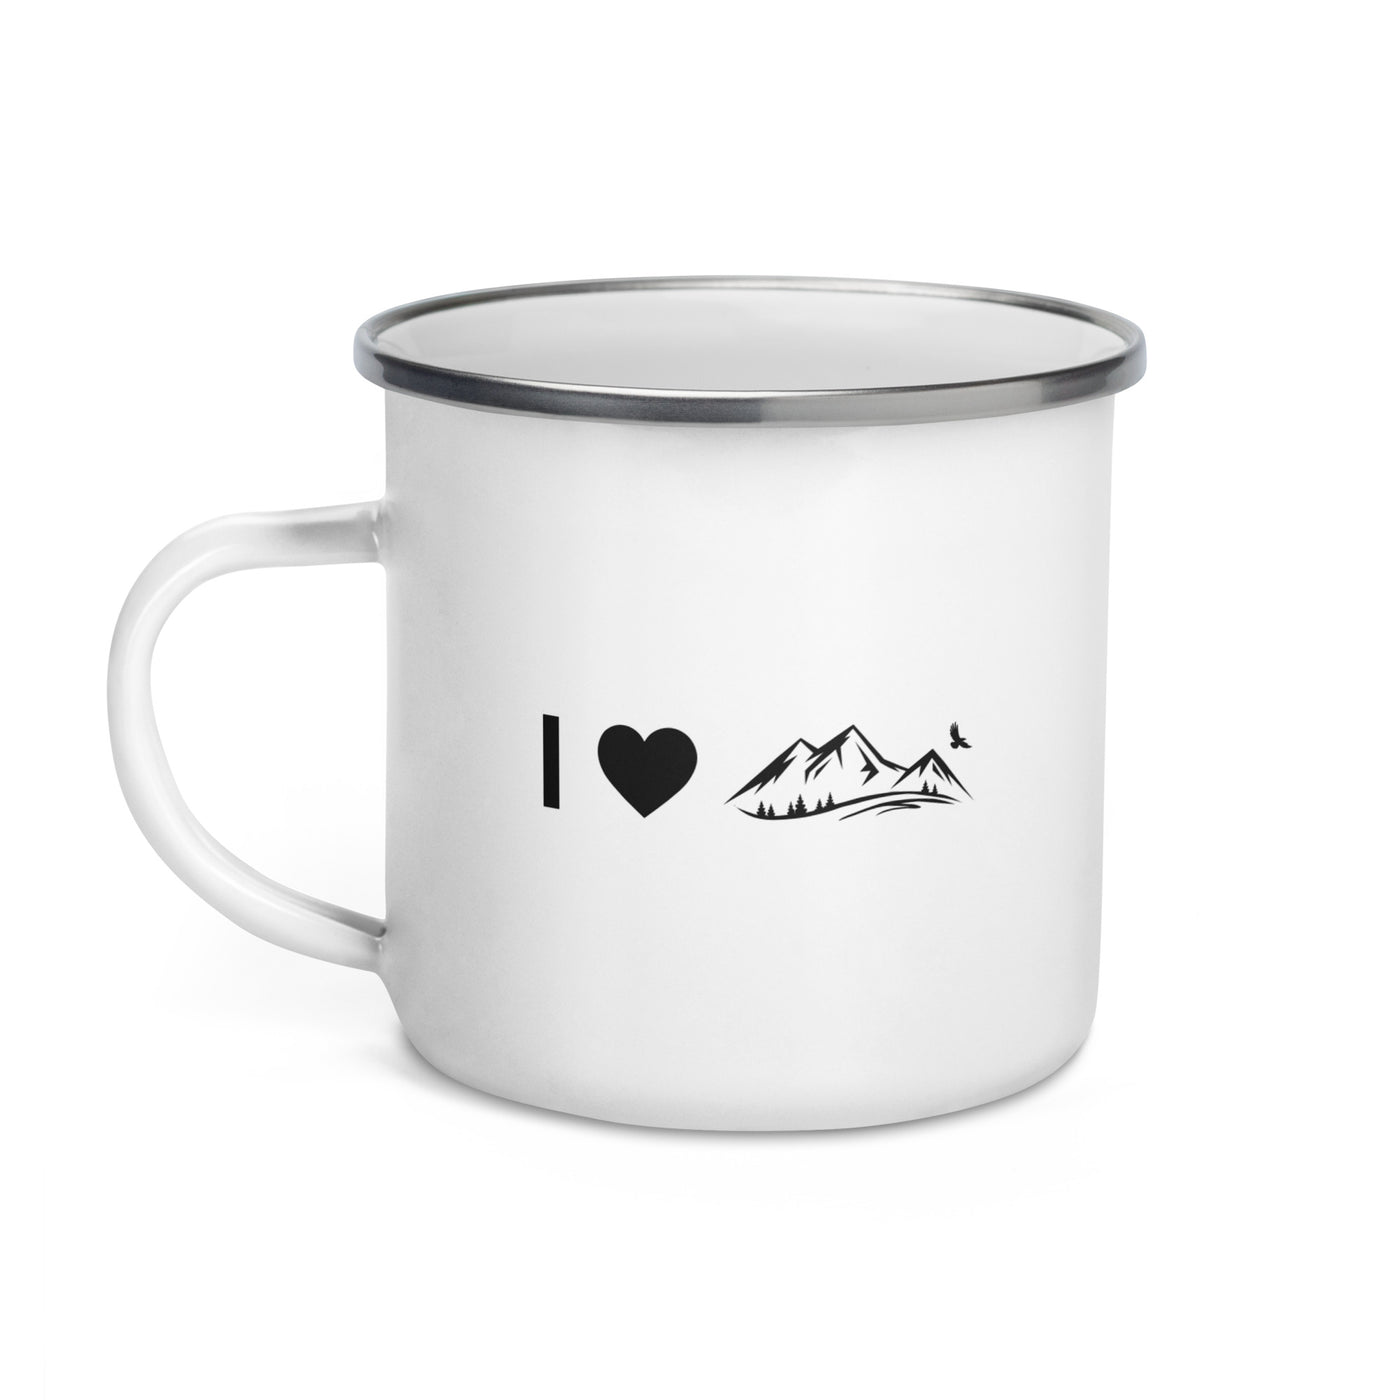 I Heart And Mountain - Emaille Tasse berge